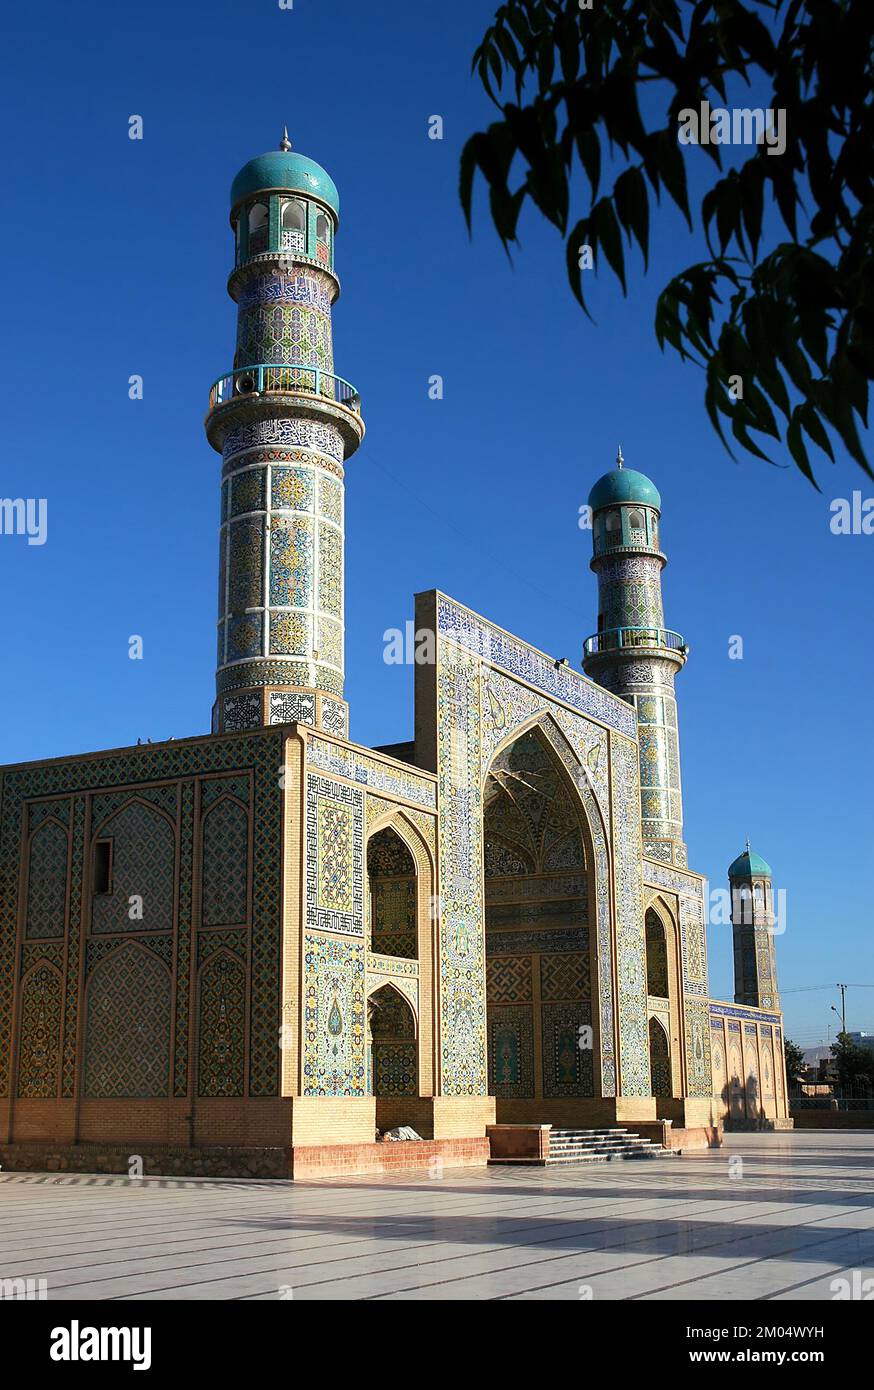 Herat in western Afghanistan. The Great Mosque of Herat (Friday Mosque or Jama Masjid). Stock Photo